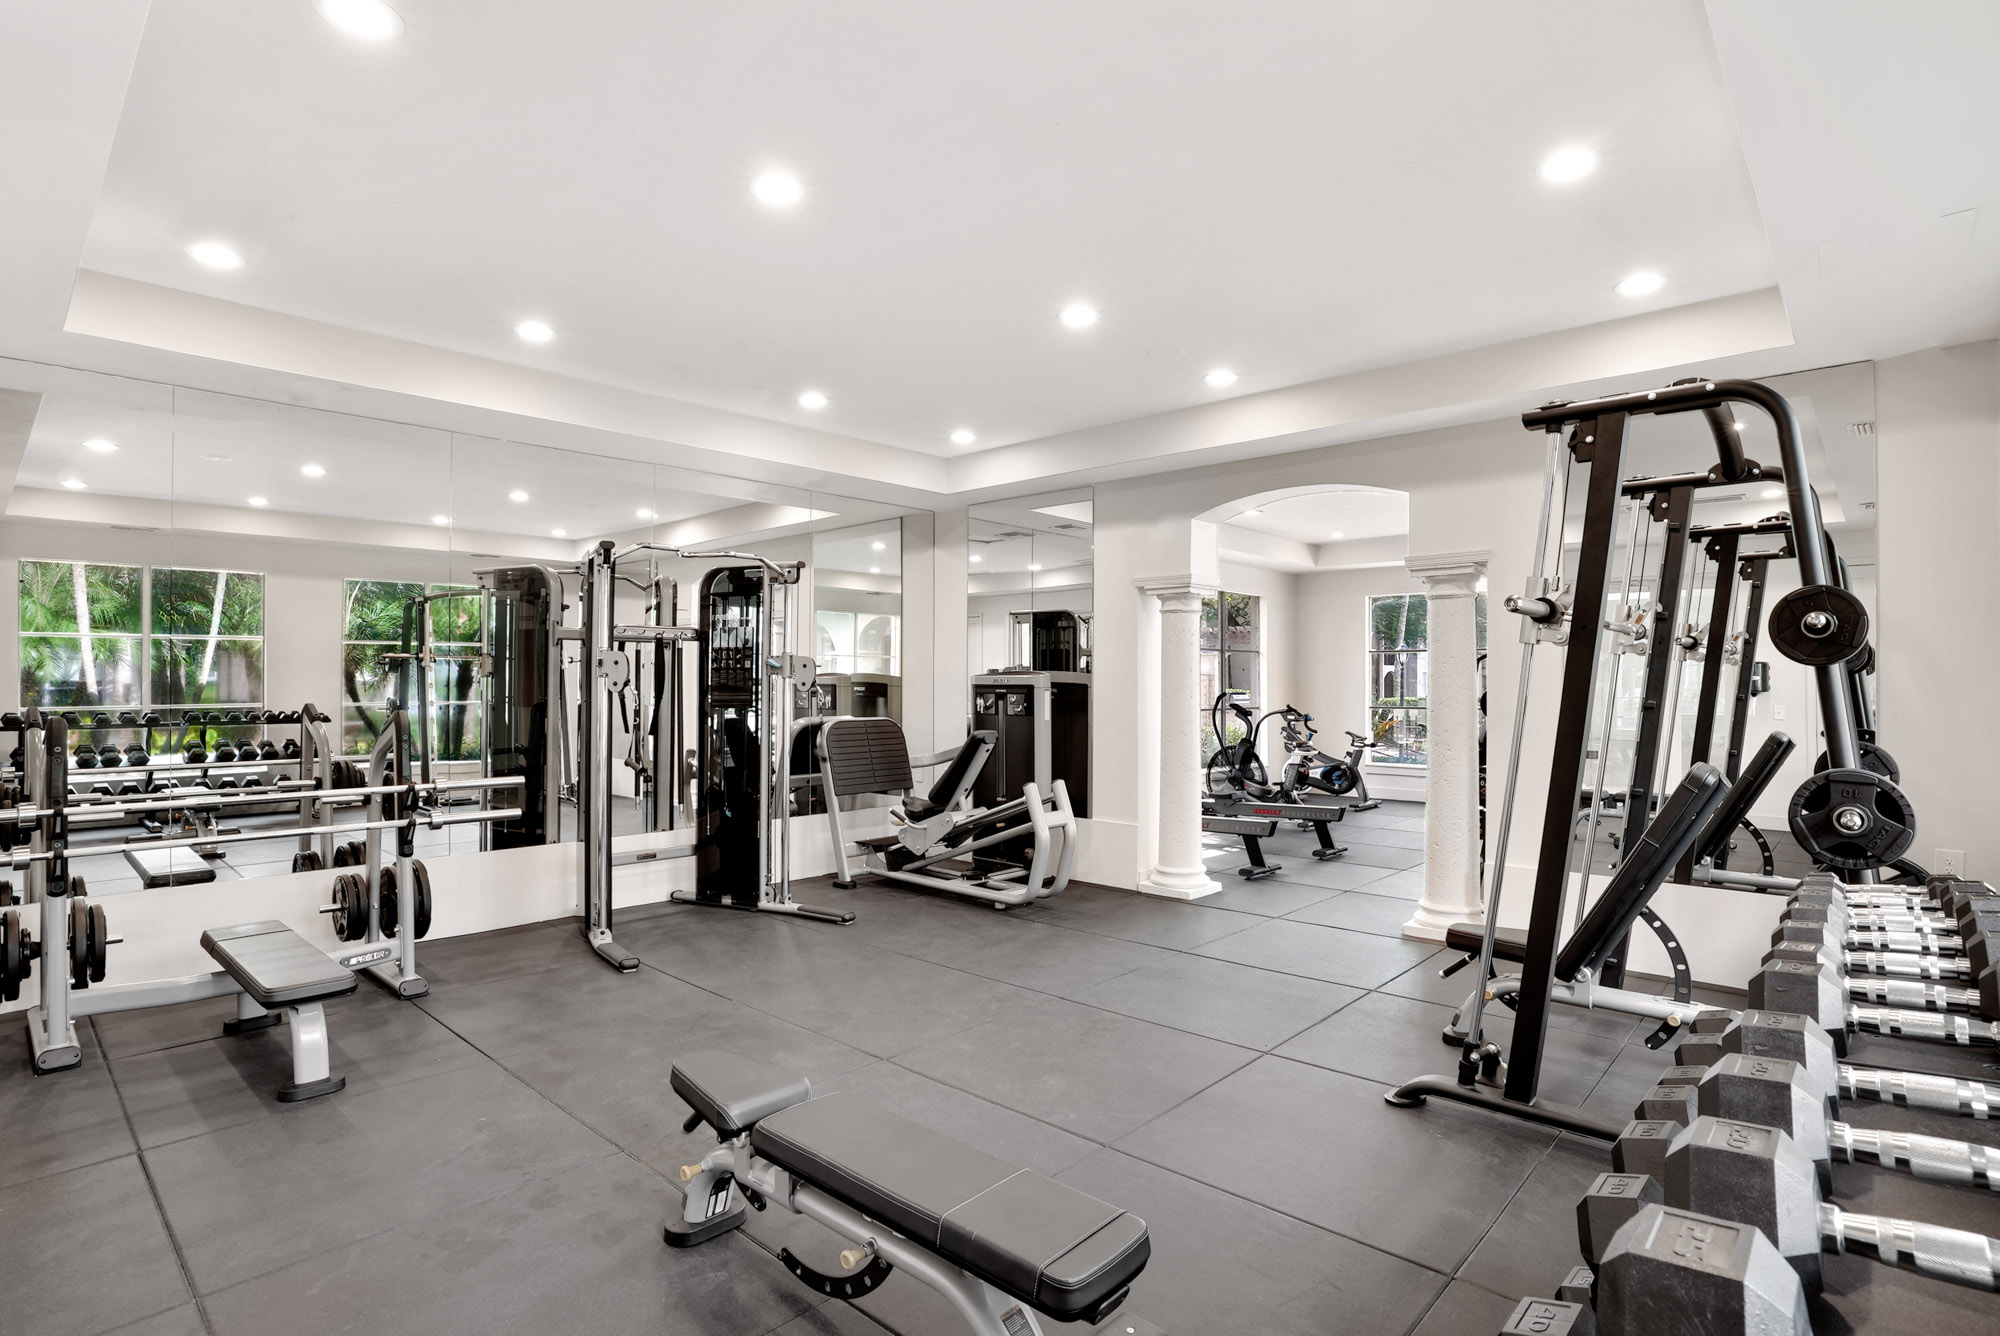 The fitness center at Miramar Lake in Fort Lauderdale, FL.